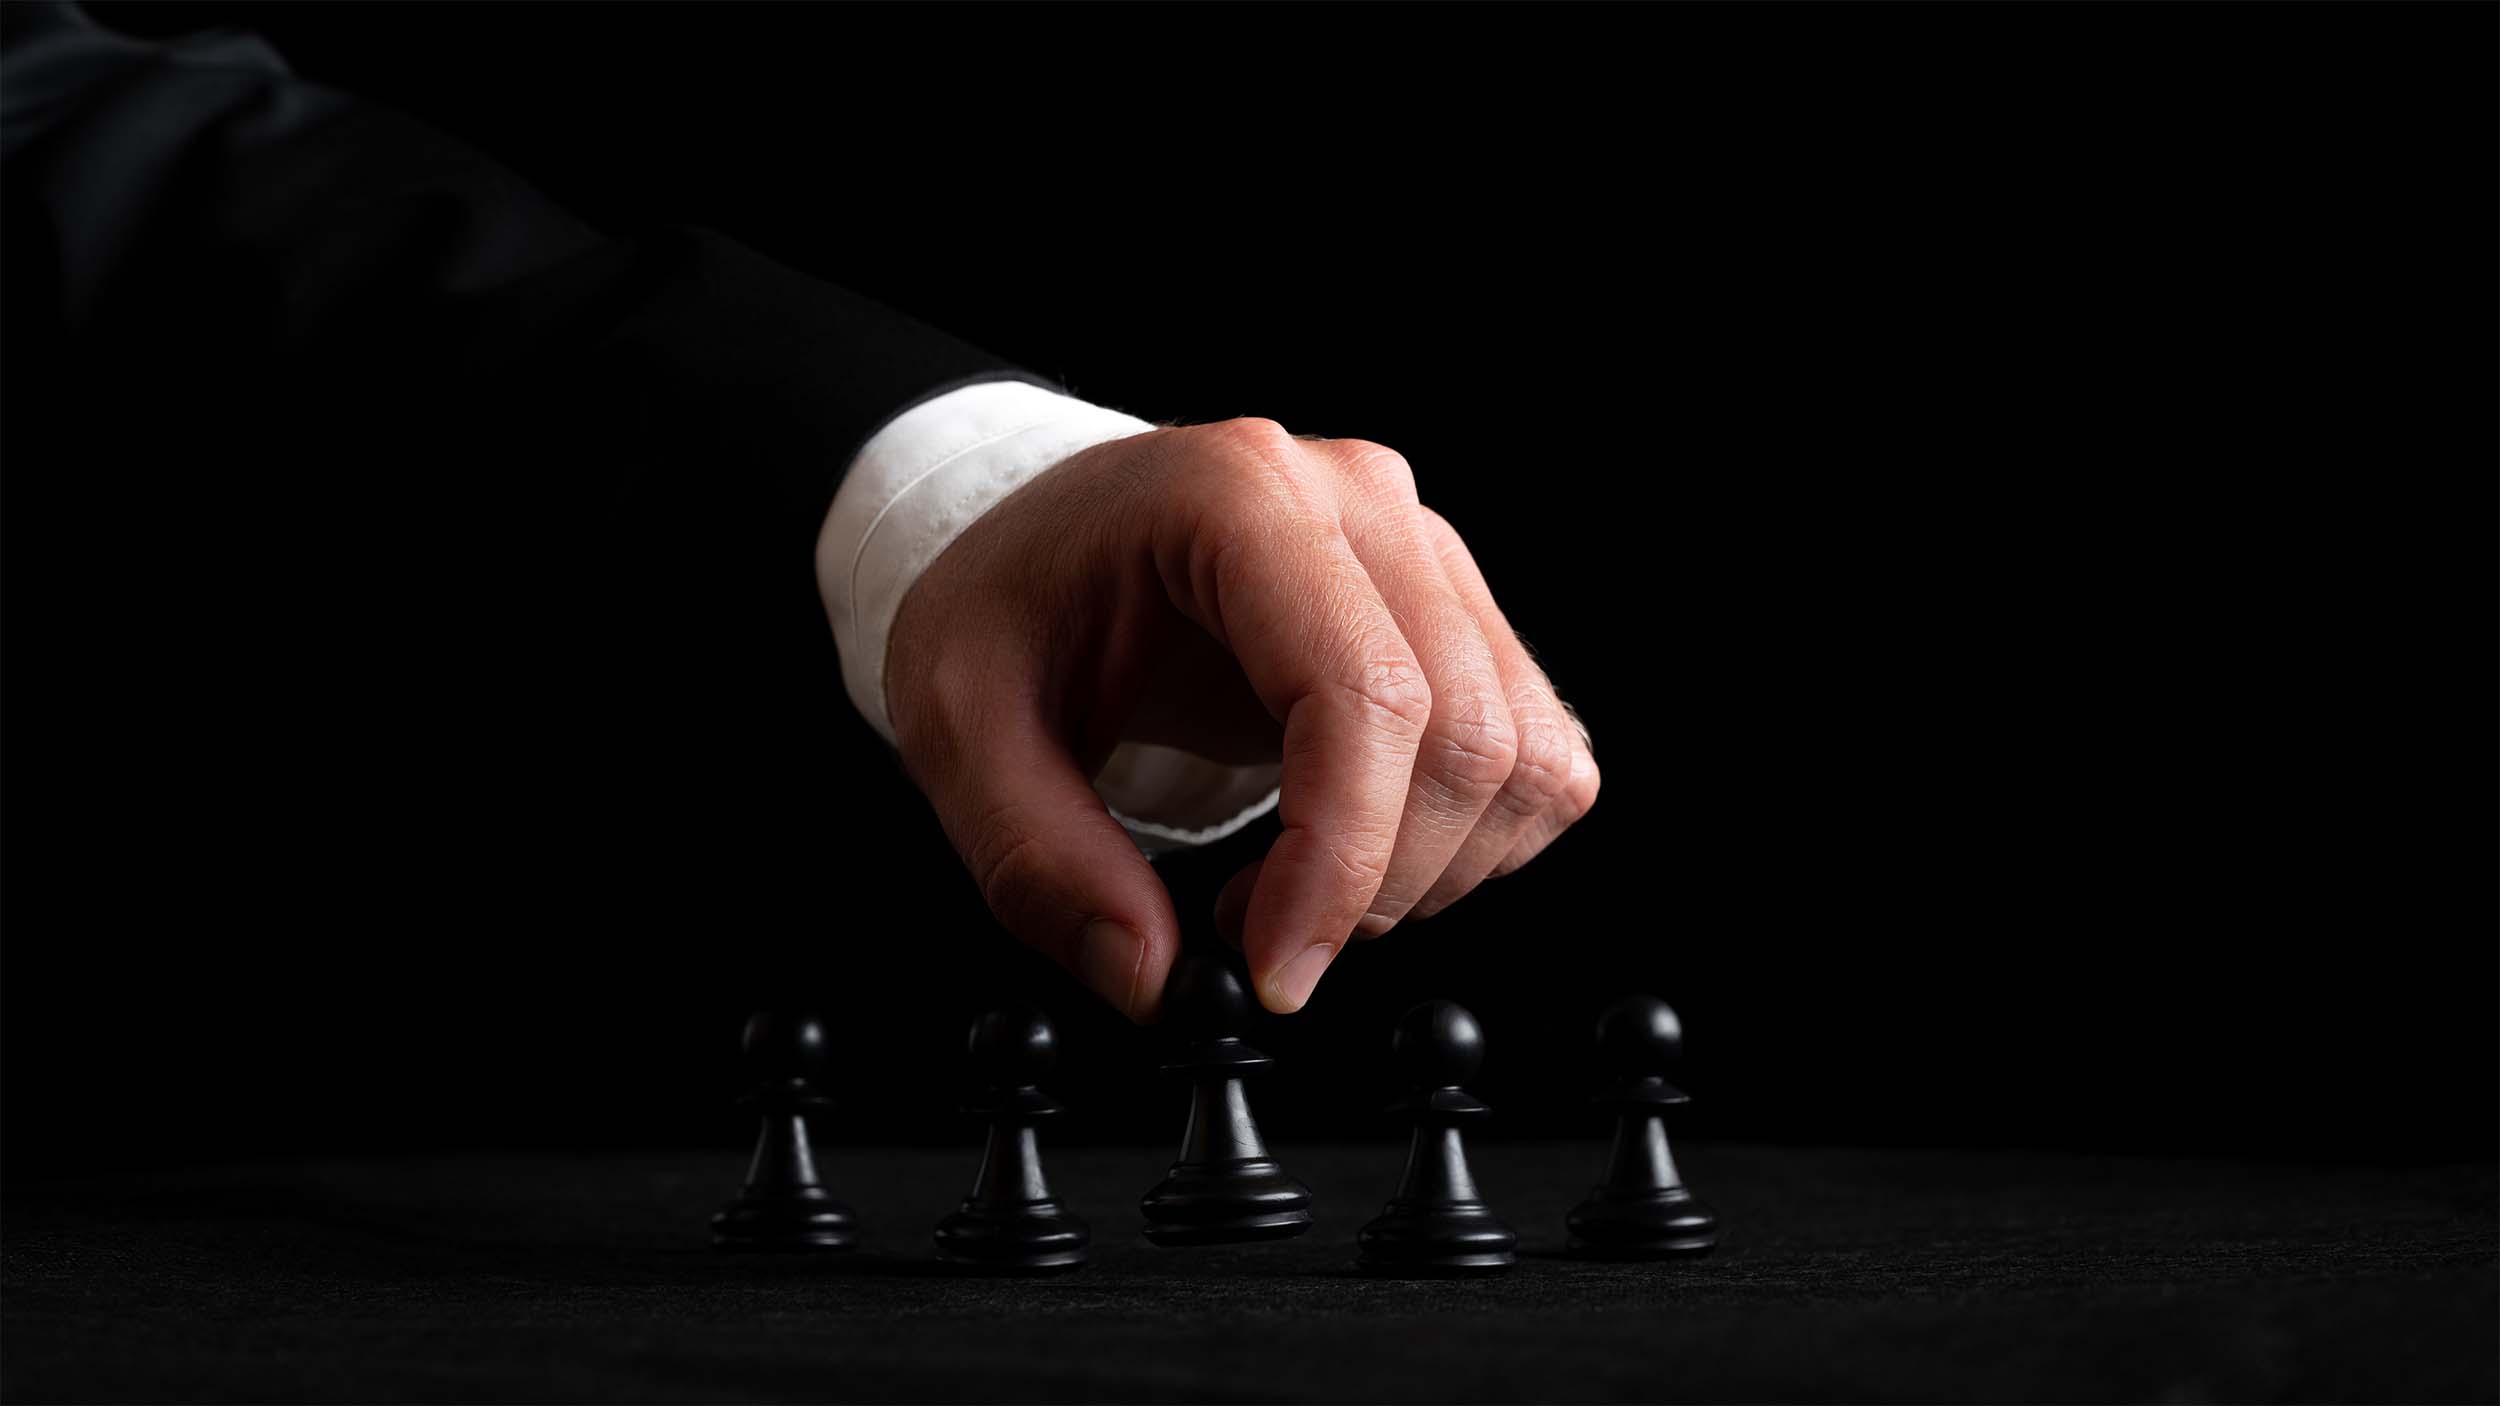 hand-businessman-arranging-chess-figures-conceptual-image-leadership-power-black-background.jpg__PID:7877816a-370c-4c90-80f3-d157f13a5022